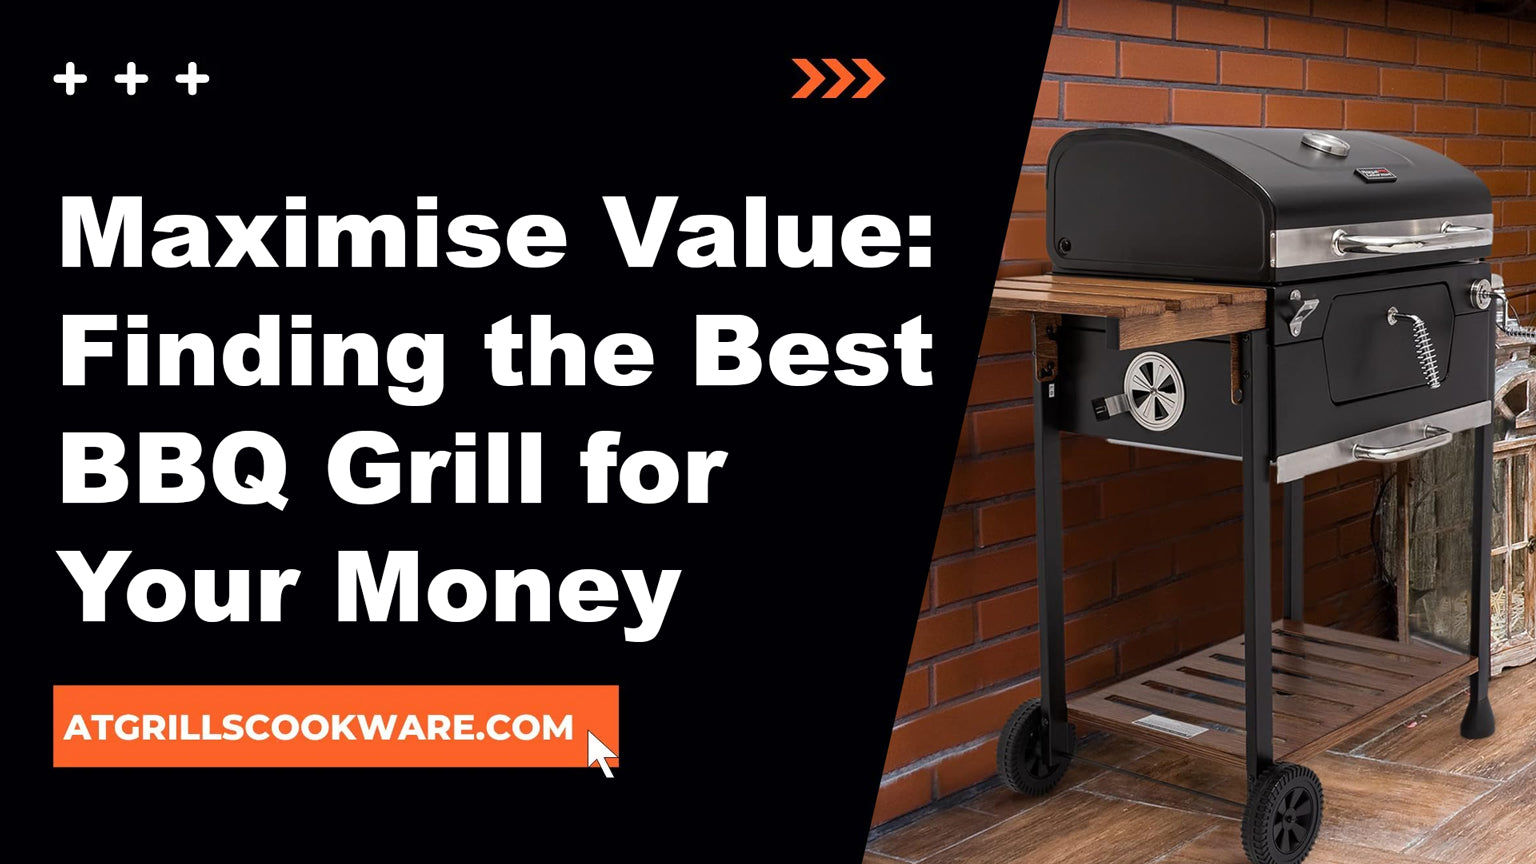 Maximize Value: Finding the Best BBQ Grill for Your Money